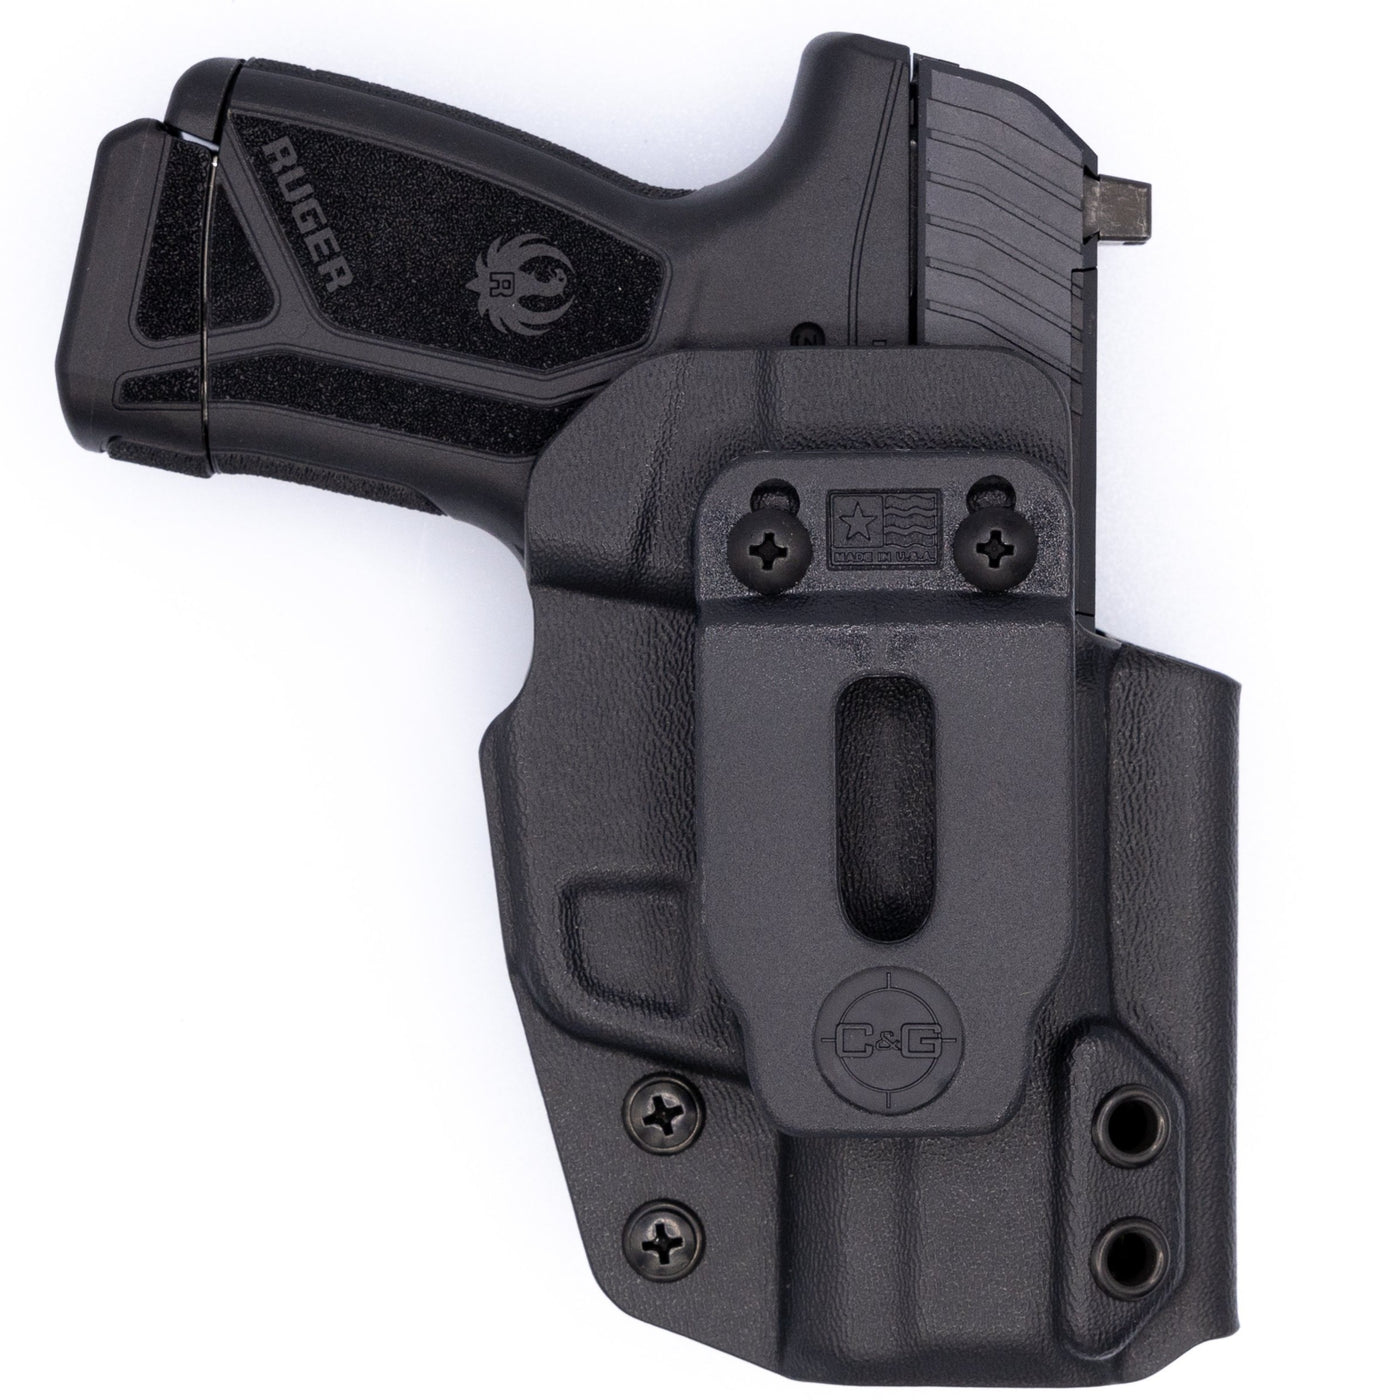 Shown is the quickship C&G Holsters IWB inside the waistband Holster for the Ruger MAX-9.